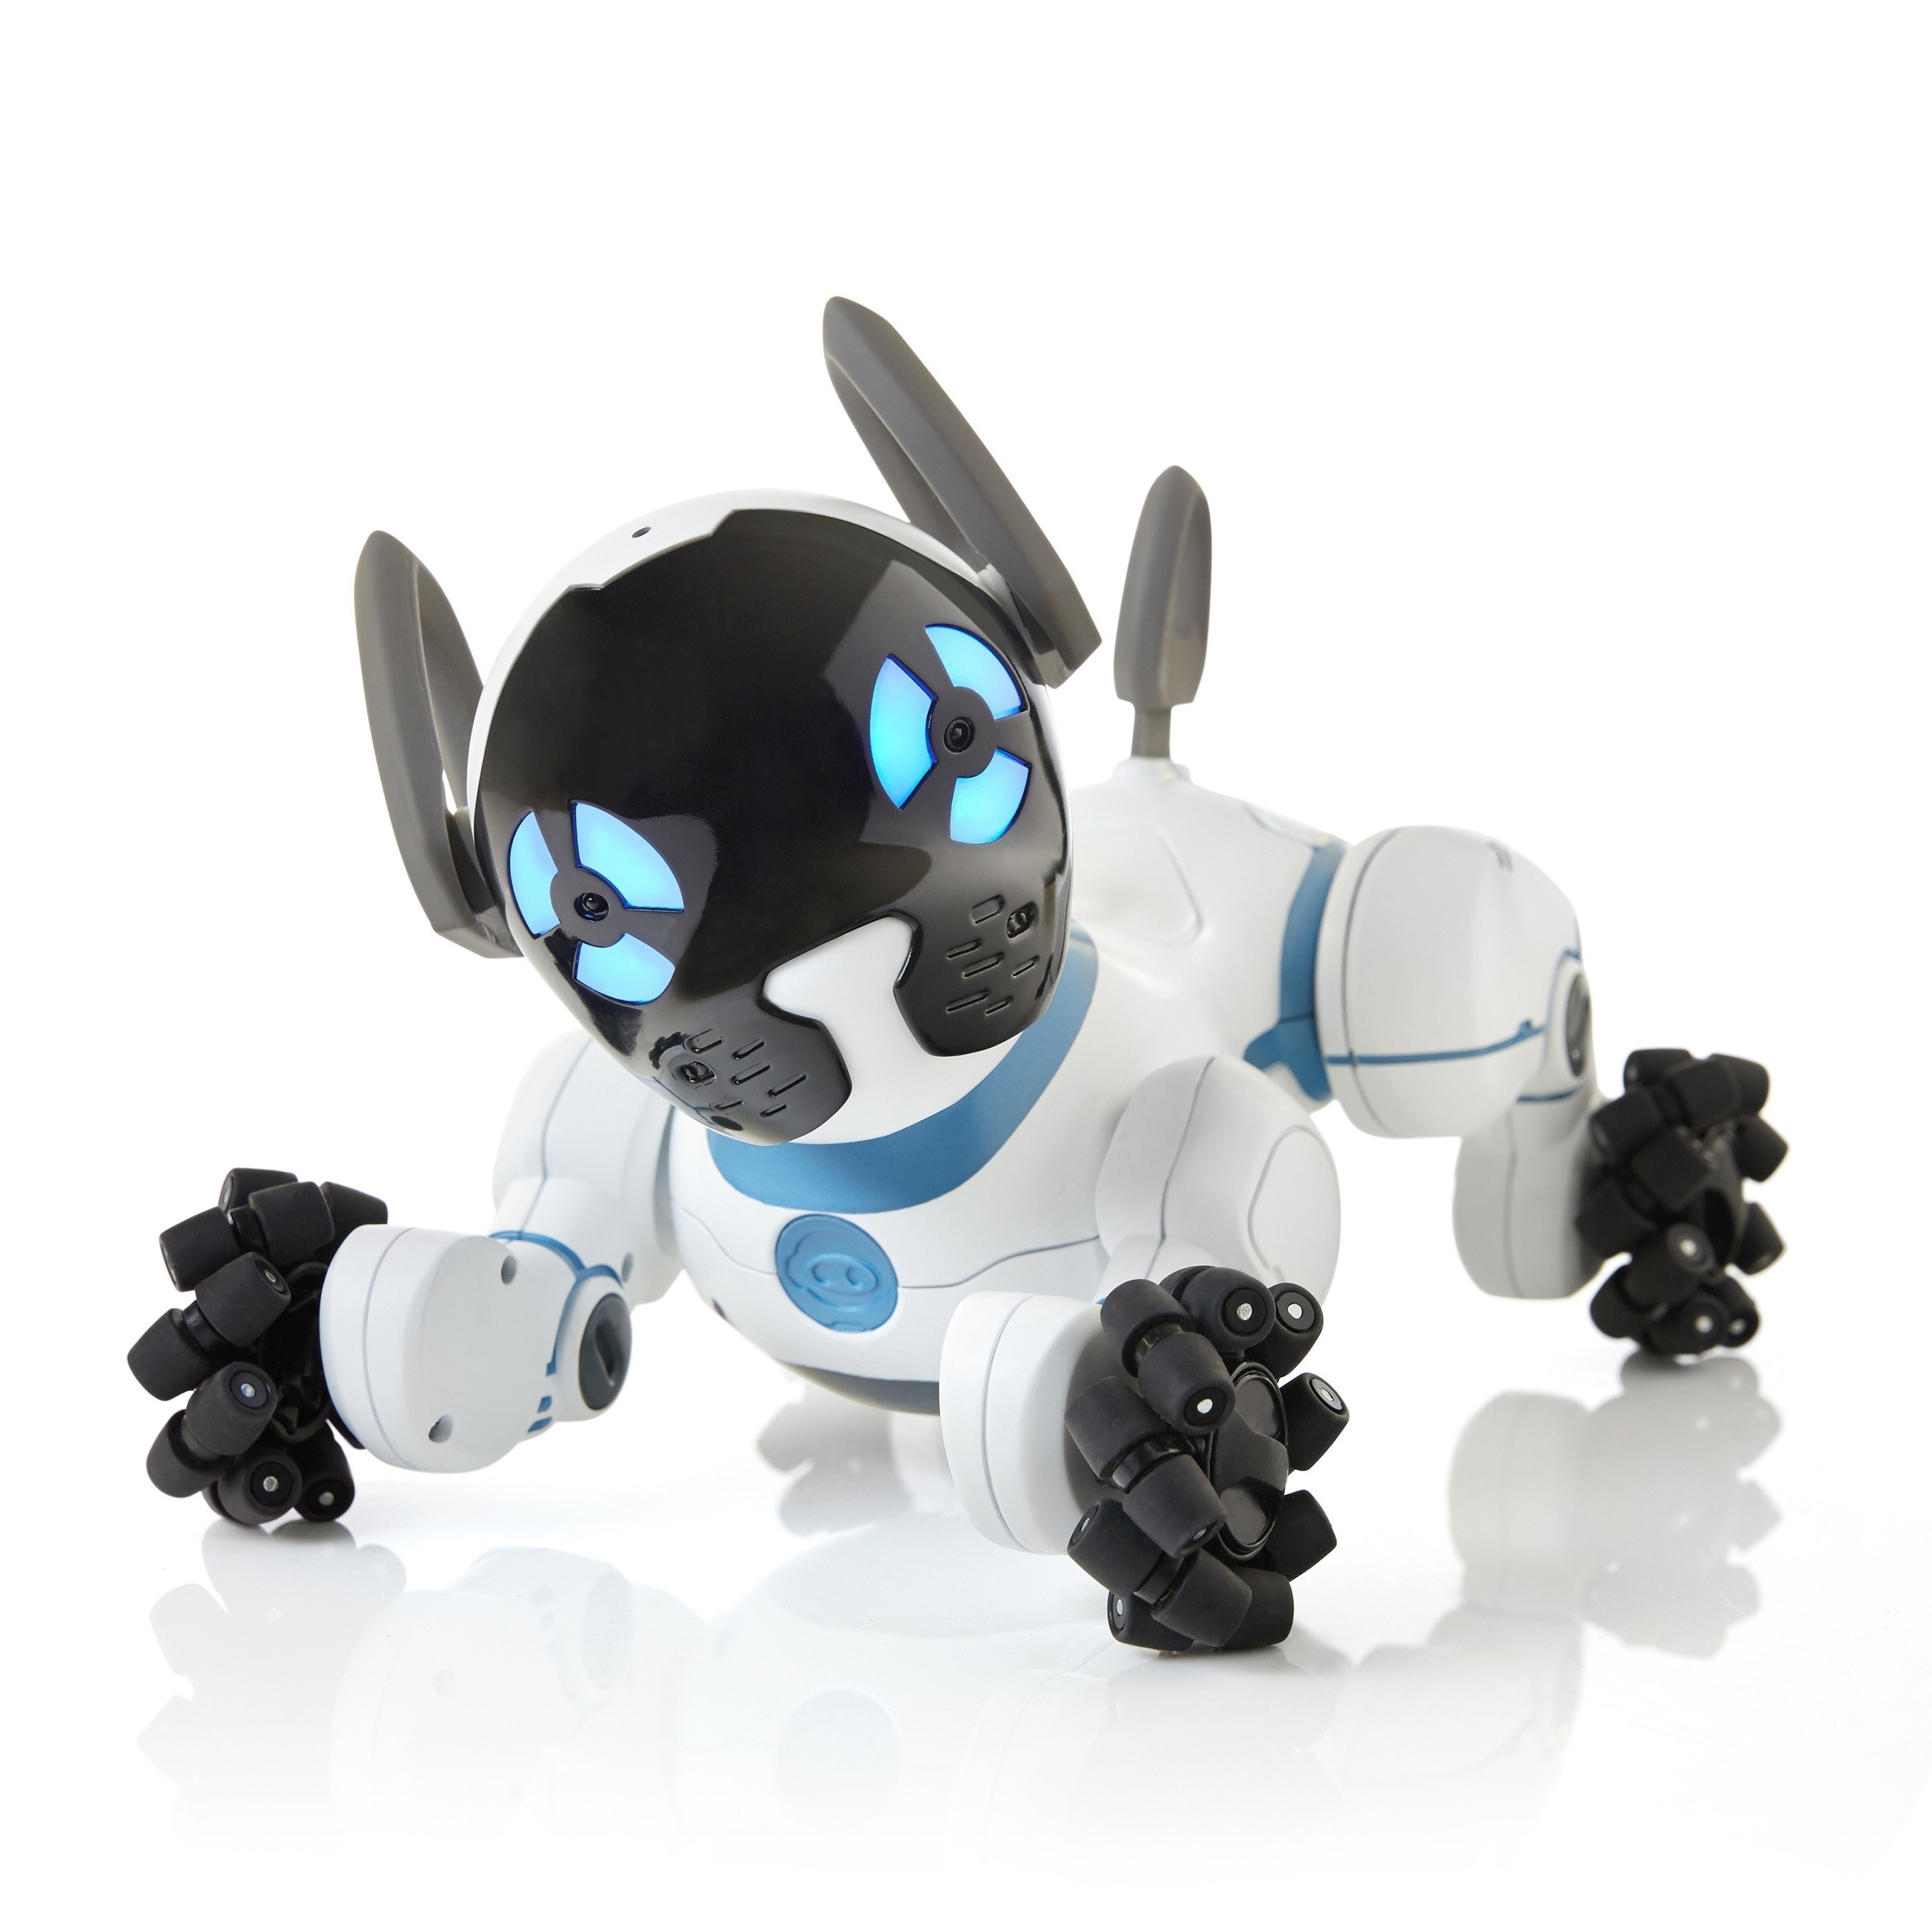 WowWee's CHiP AI Robotic Dog is a Top Tech Toy this Holiday season!